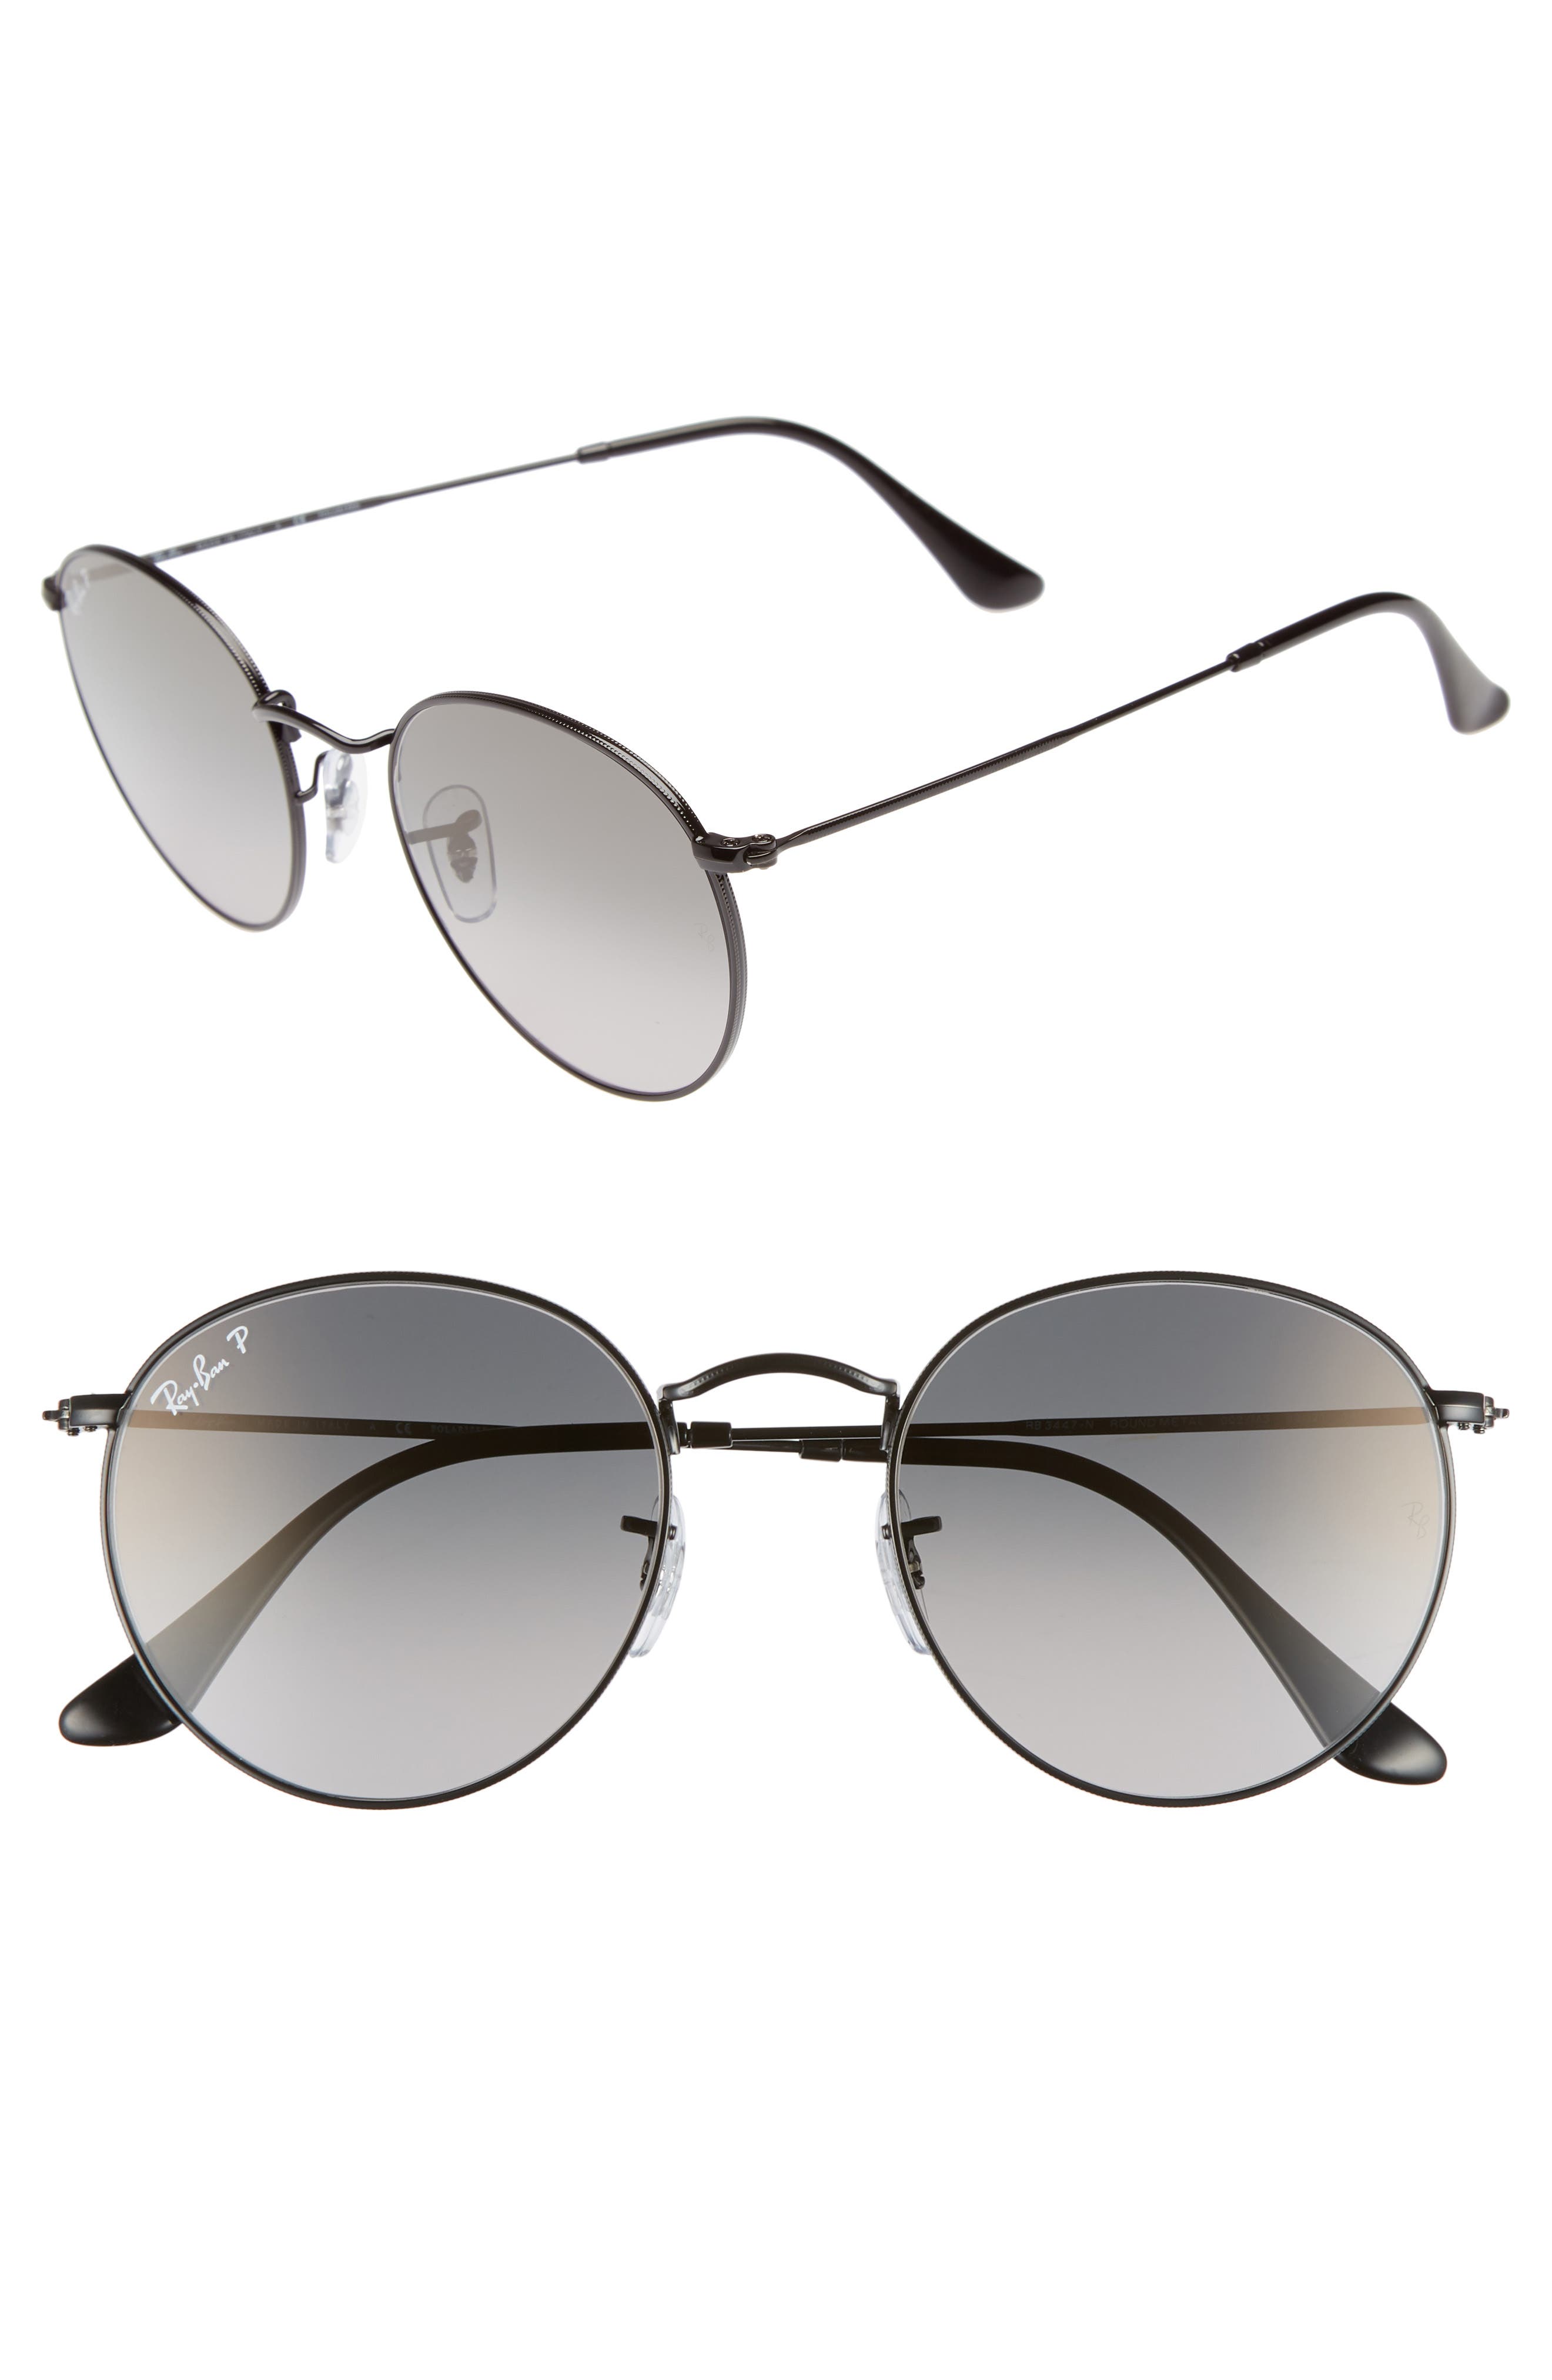 nordstrom ray ban sale